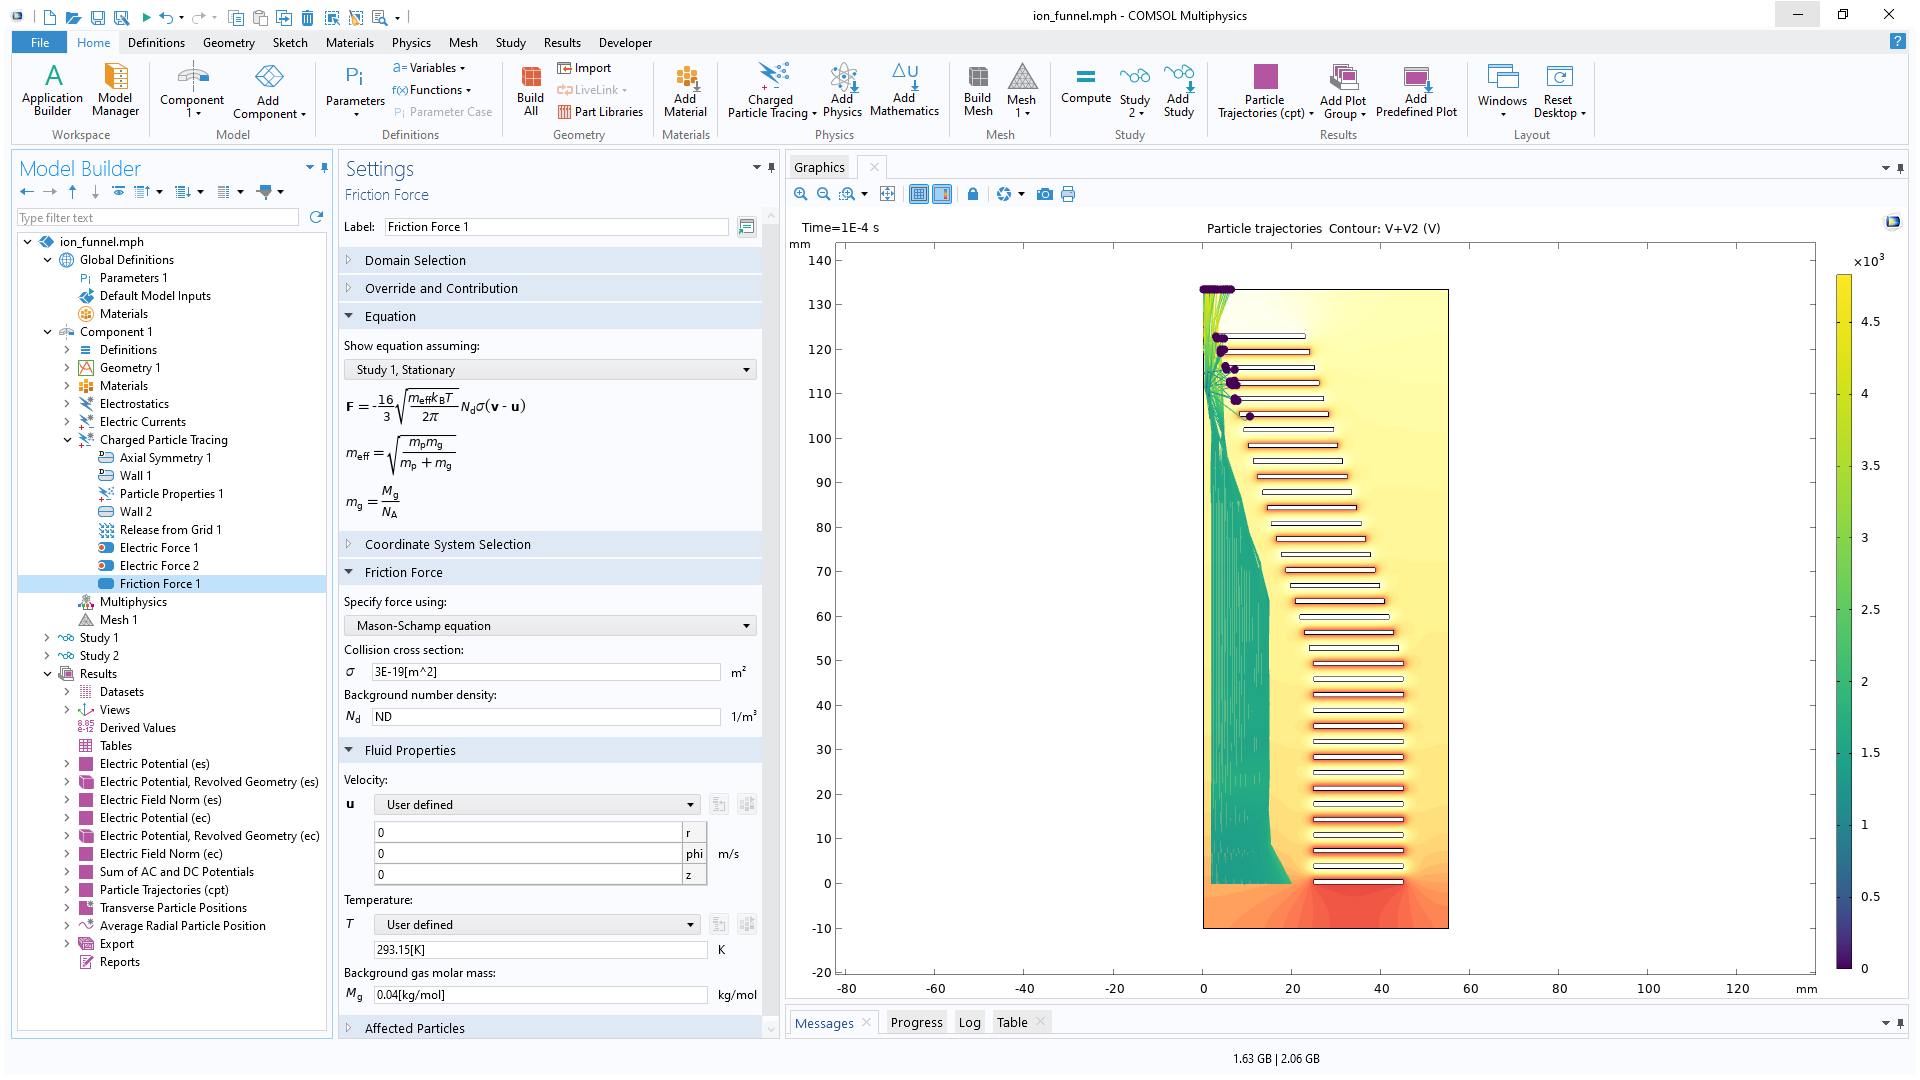 The COMSOL Multiphysics UI showing the Model Builder with the Friction Force node highlighted, the corresponding Settings window, and an ion funnel model in the Graphics window.